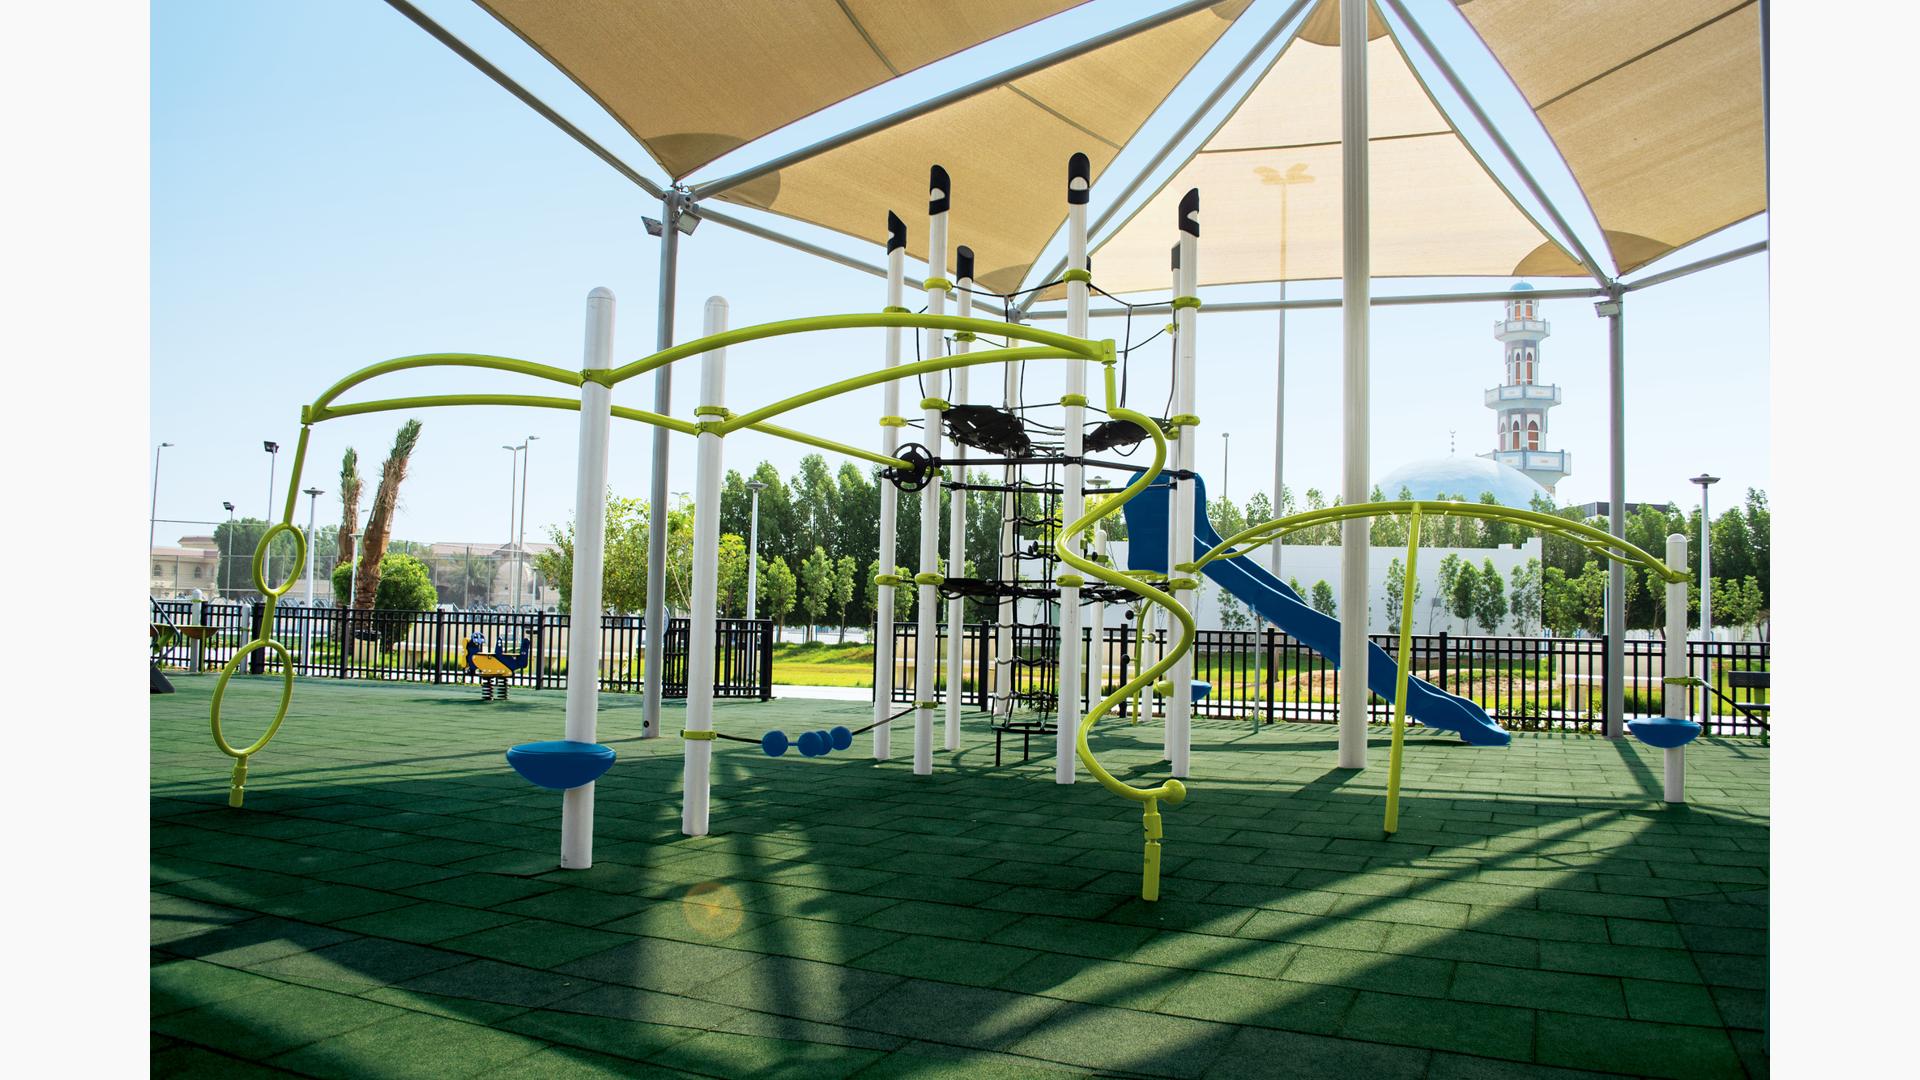 A fenced in play area with a single play structure with additional connected tight rope bridge, monkey bars, and spinners all underneath a large shade system overhead.